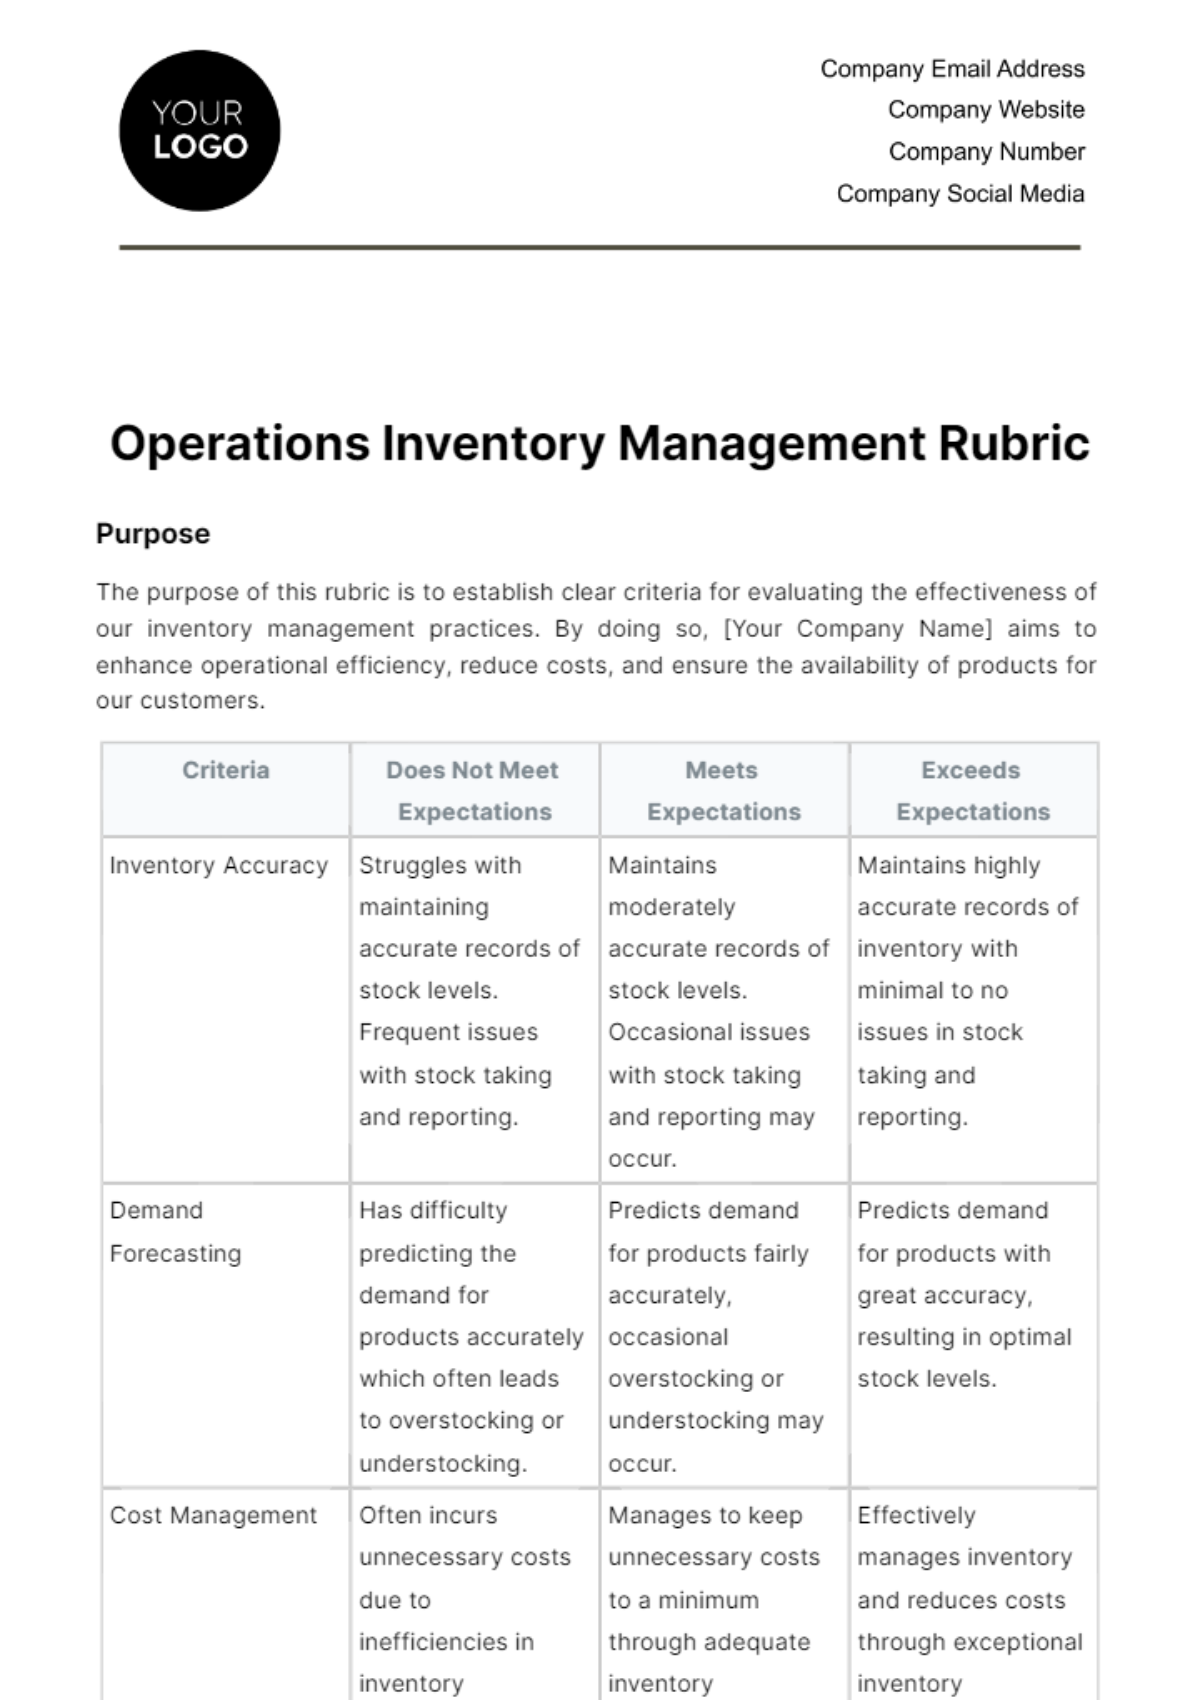 Operations Inventory Management Rubric Template